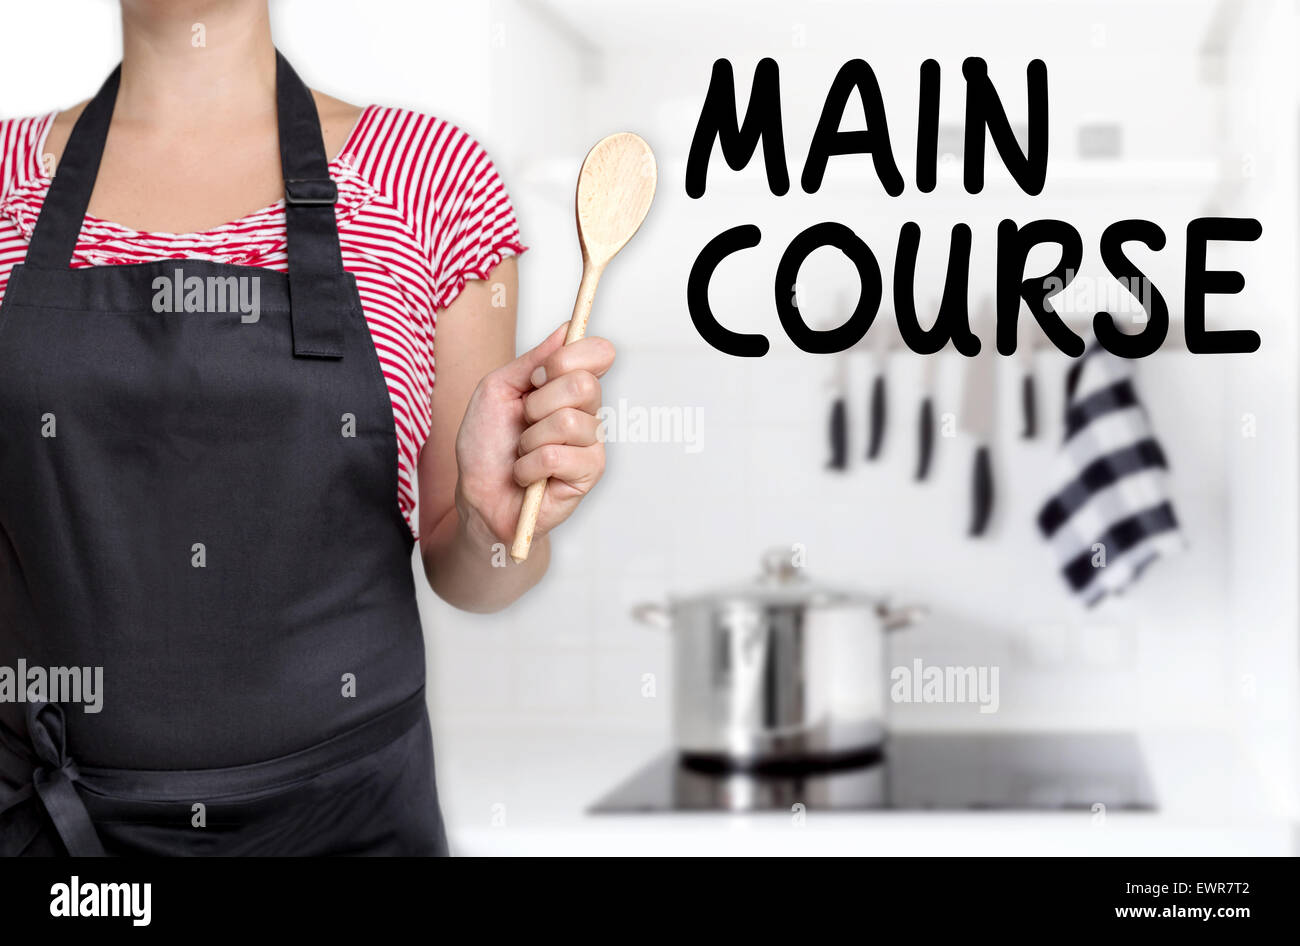 Main course cook holding wooden spoon background. Stock Photo